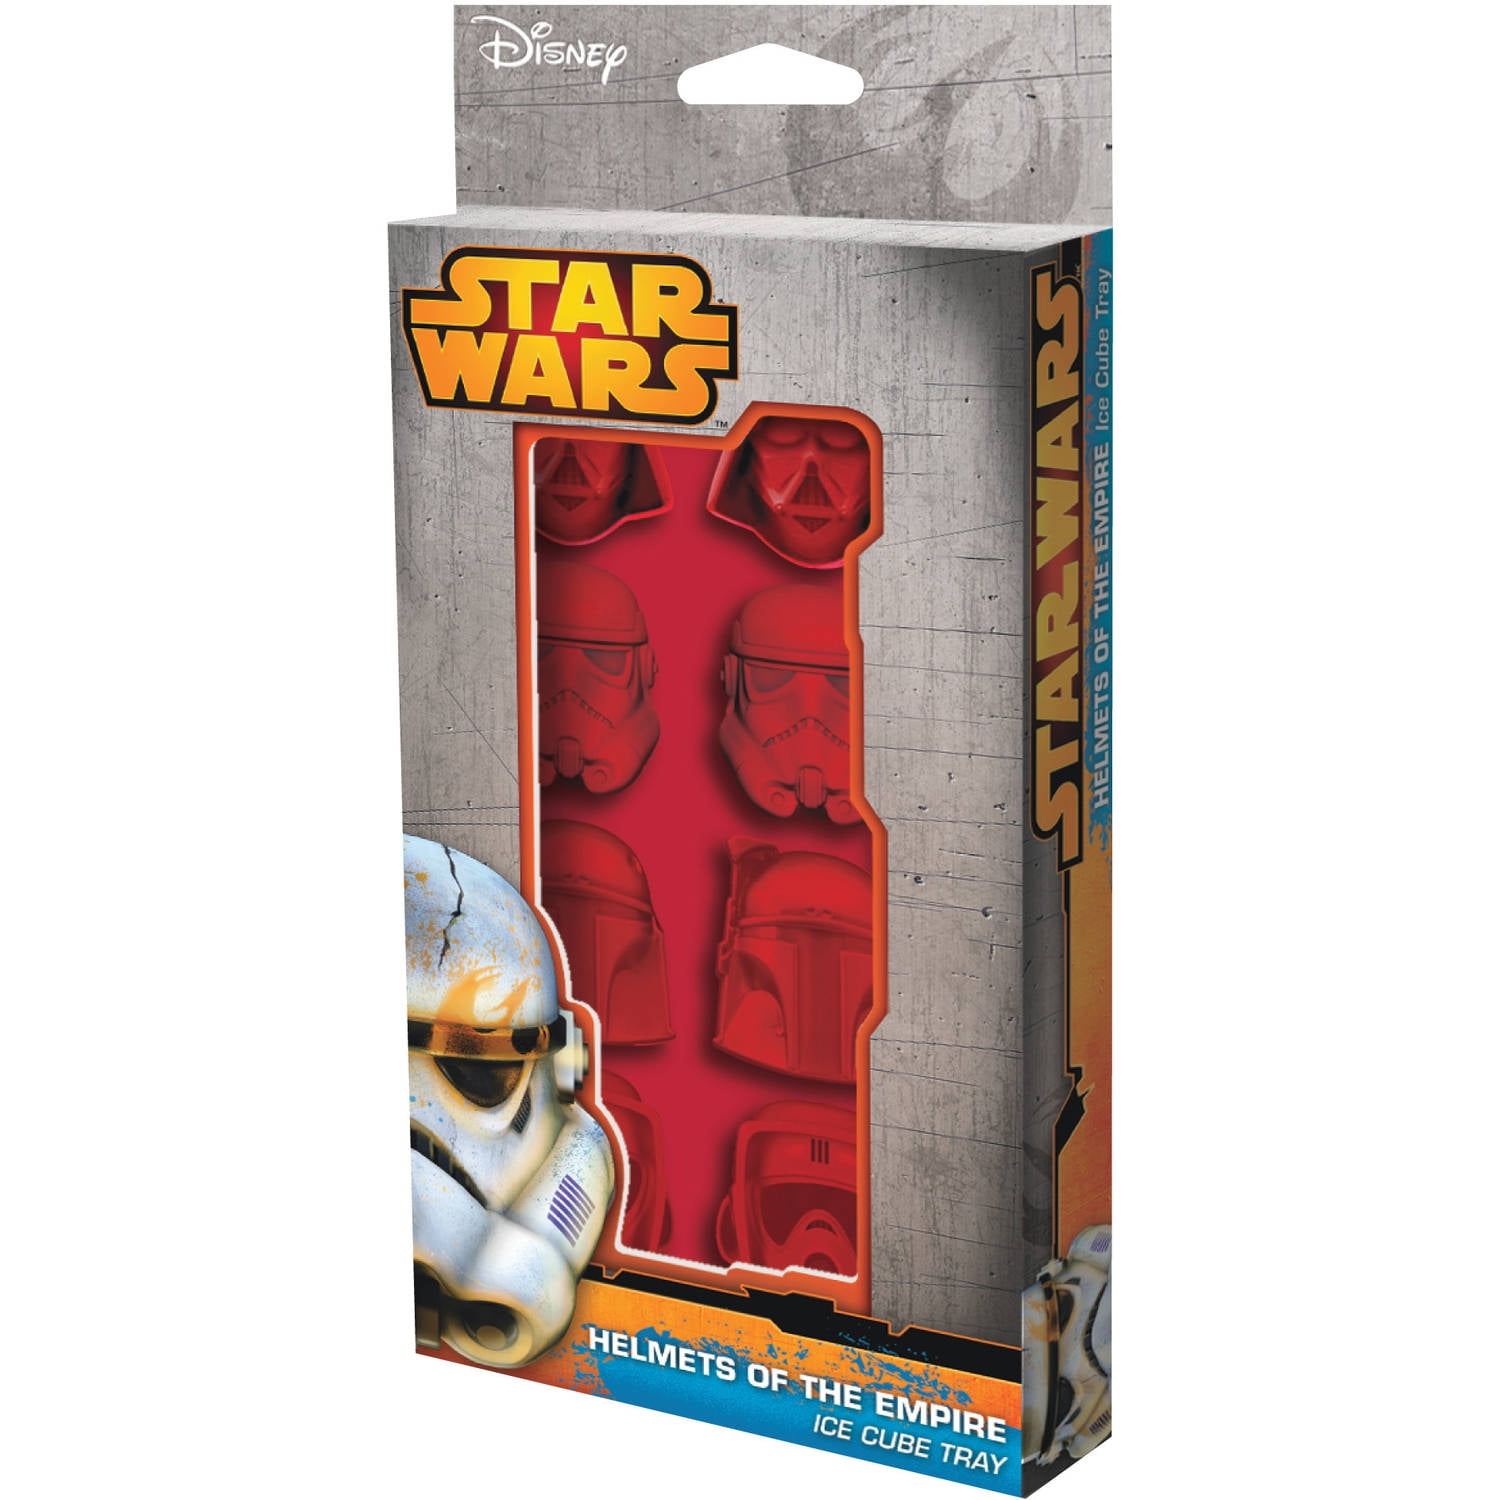 ICUP Star Wars Helmets of the Empire Ice Cube Tray